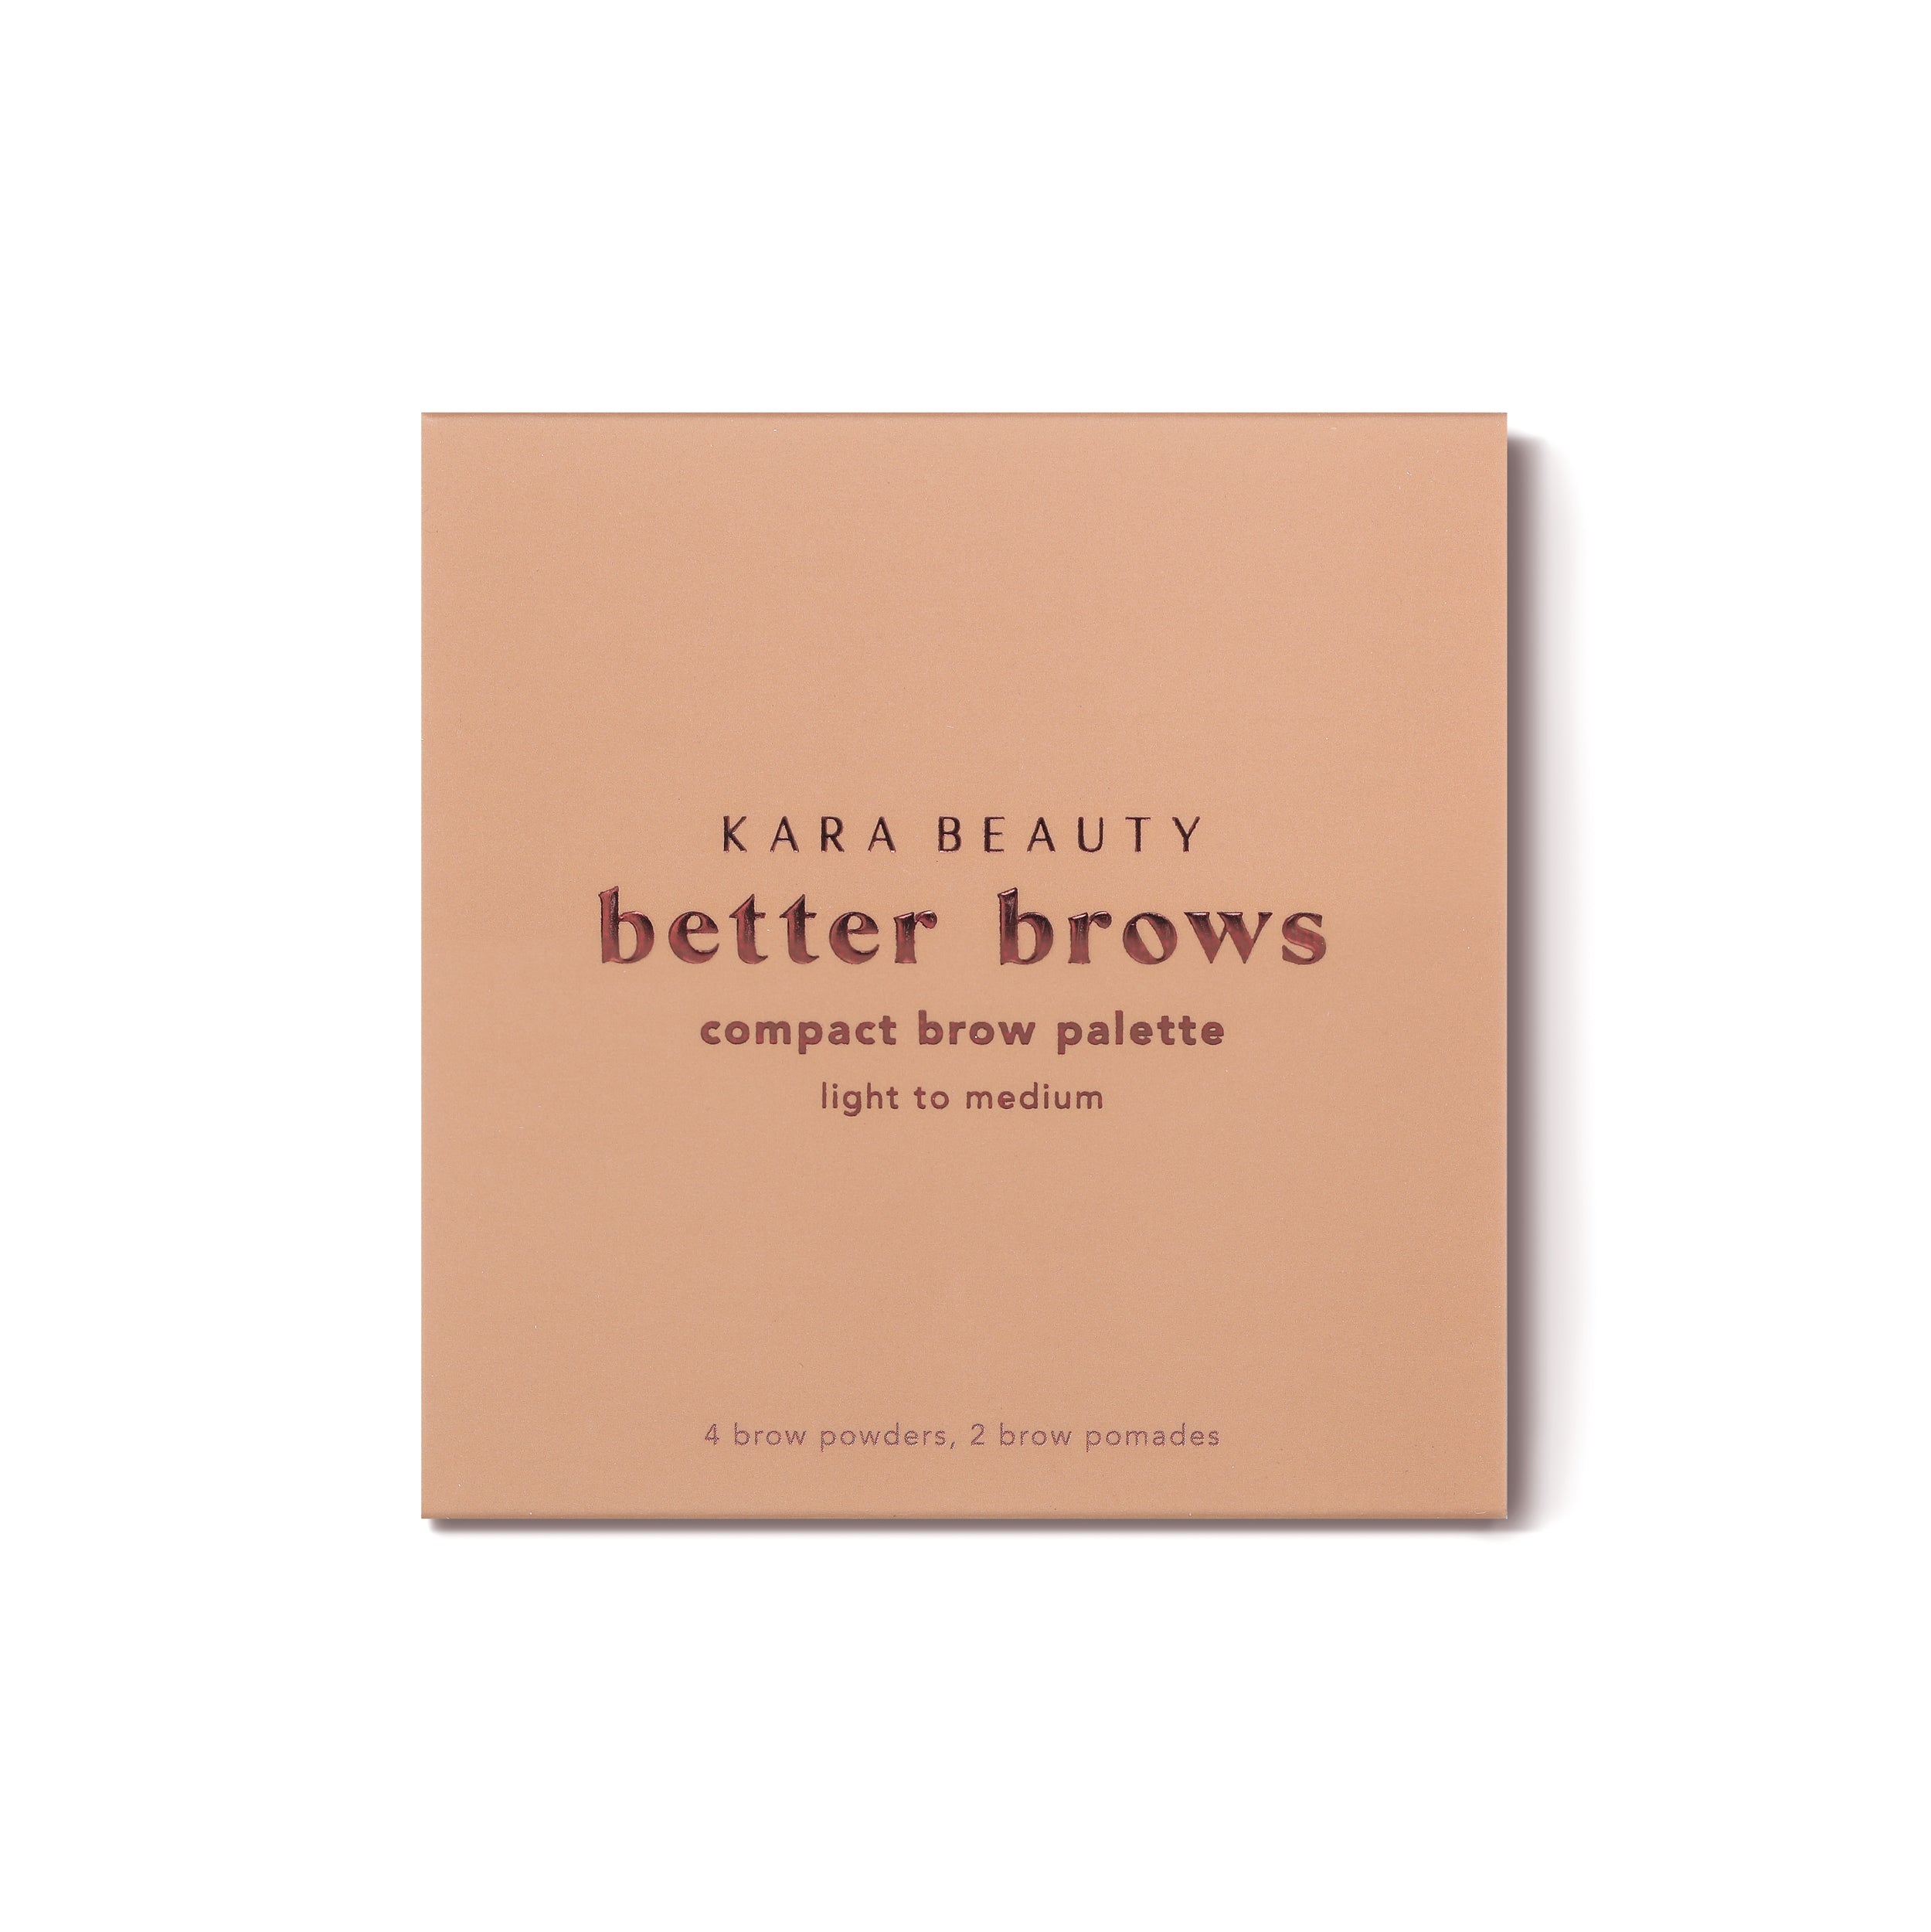 Better brows compact brow palette light to medium